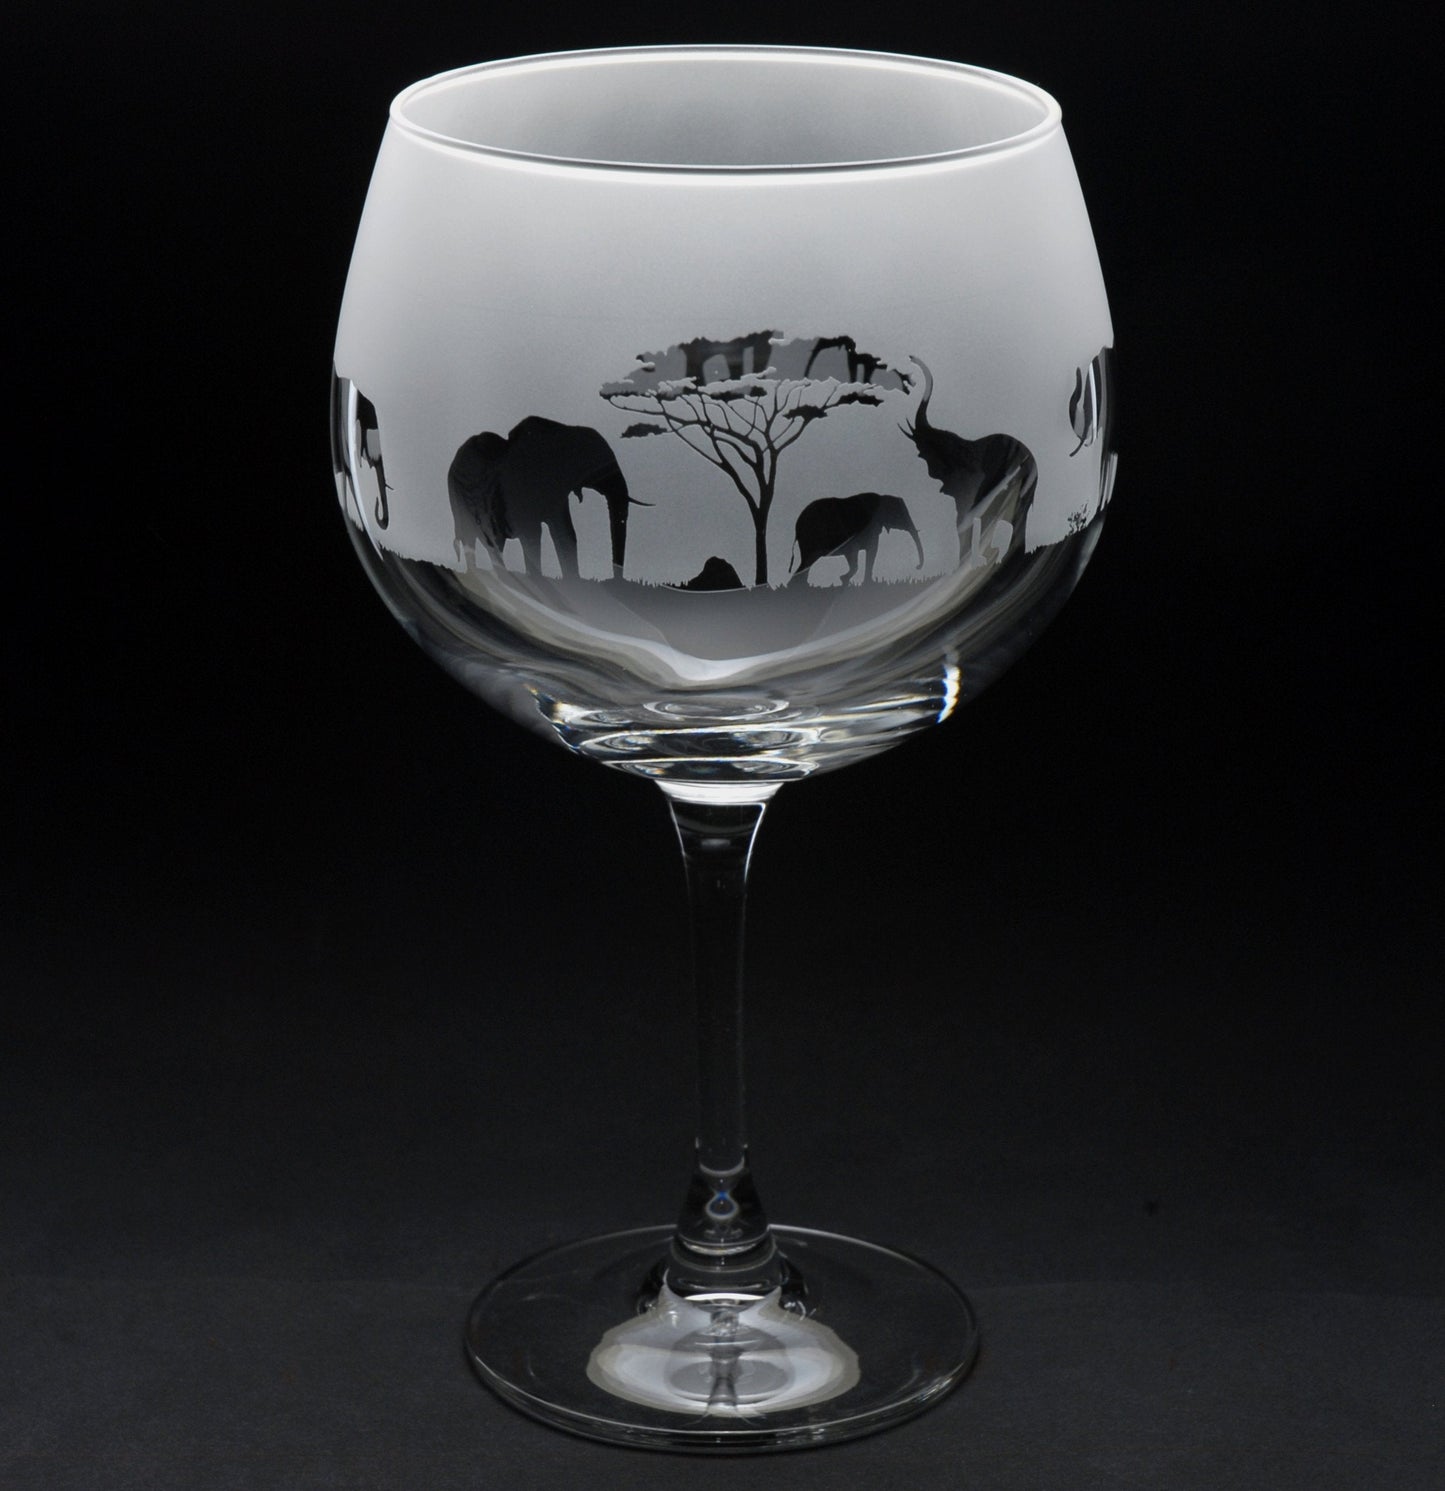 Elephant Gin Cocktail Glass - Hand Etched/Engraved Gift